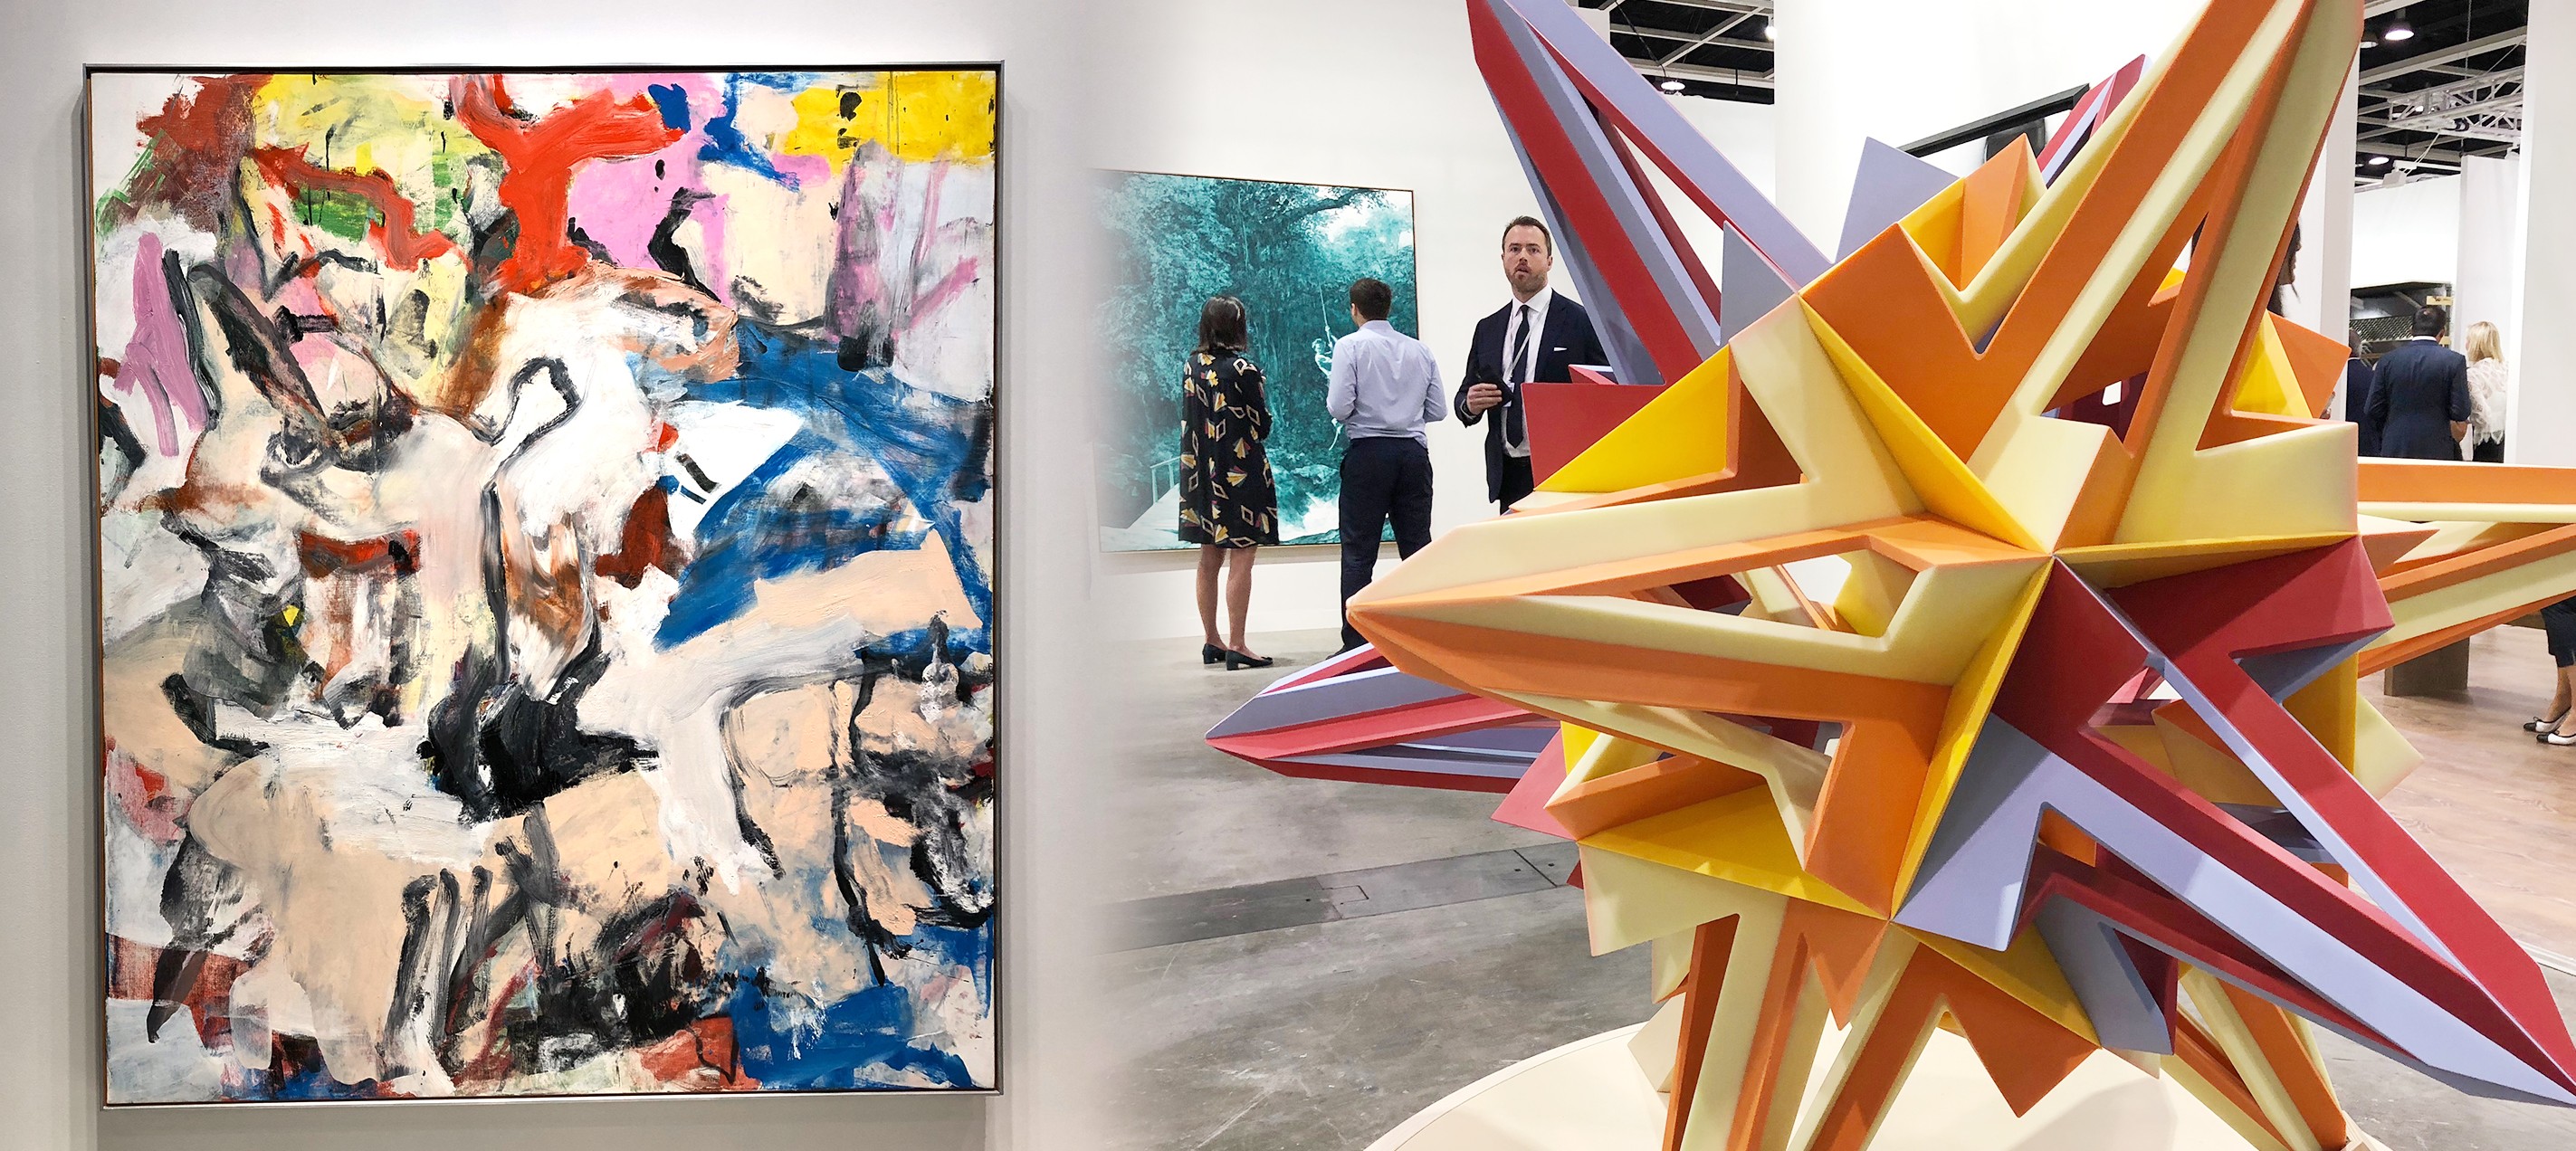 A collage of the artworks on display at the Lévy Gorvy booth. Photo: Kwokwang Chow